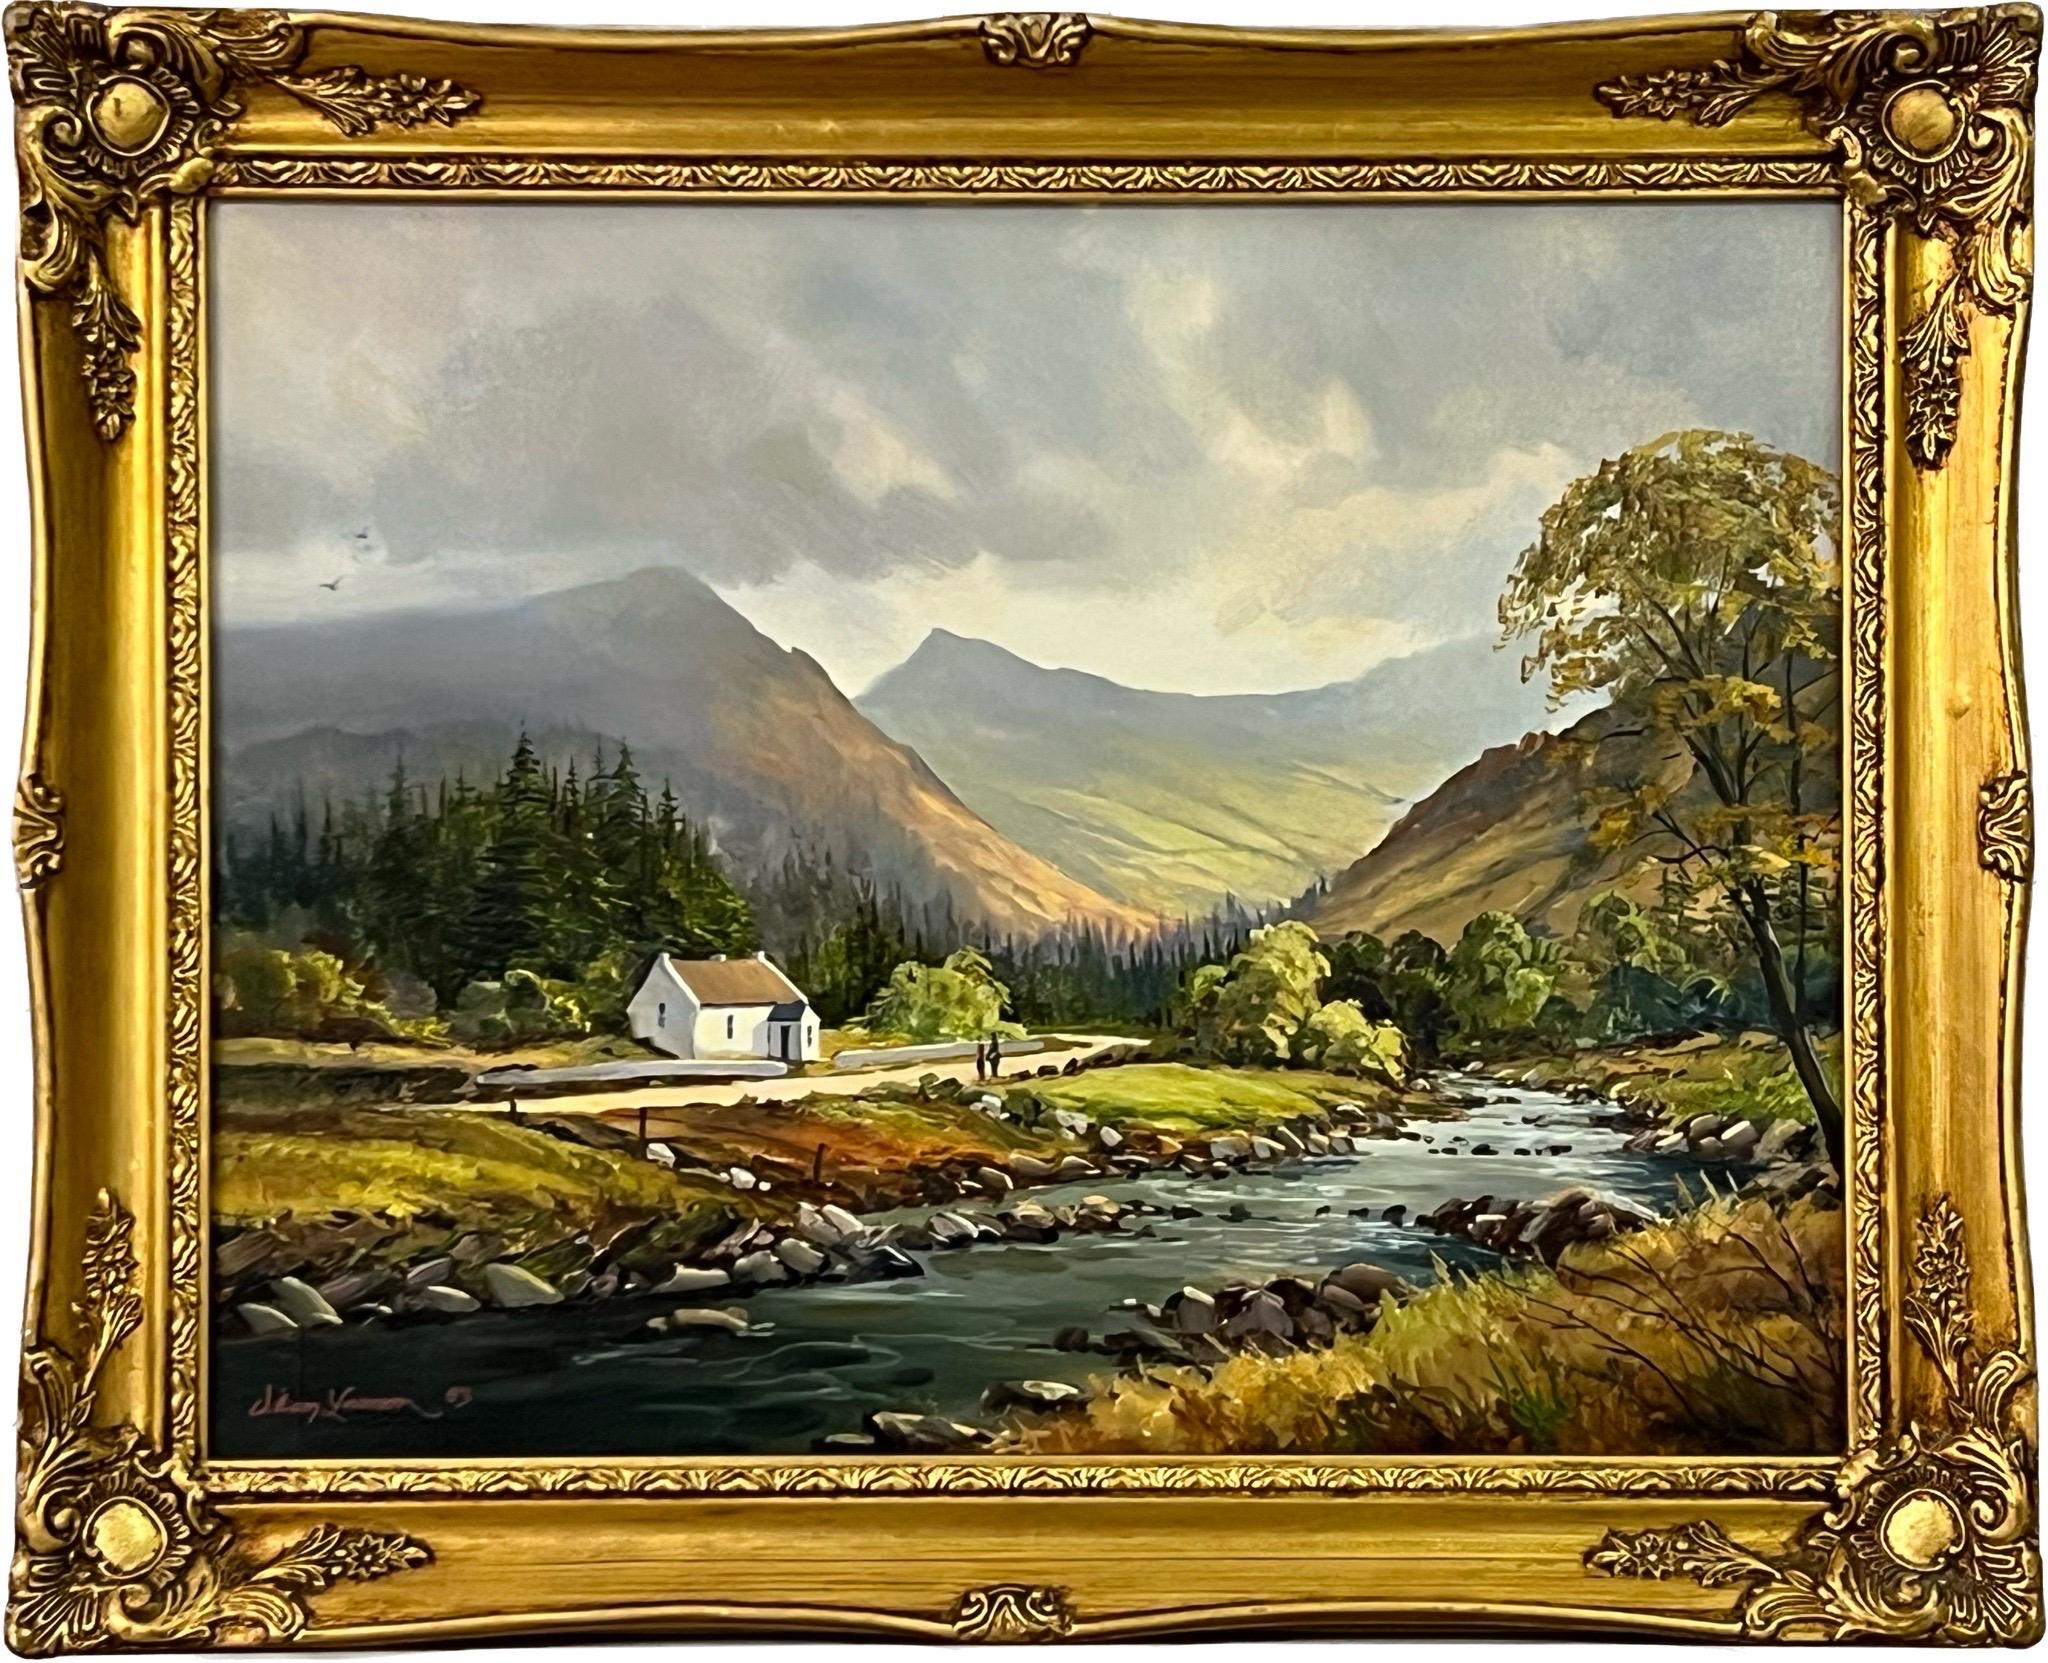 William Yeaman Figurative Painting - Figures by a River Cottage in the Irish Mountain Landscape with Lush Green Trees